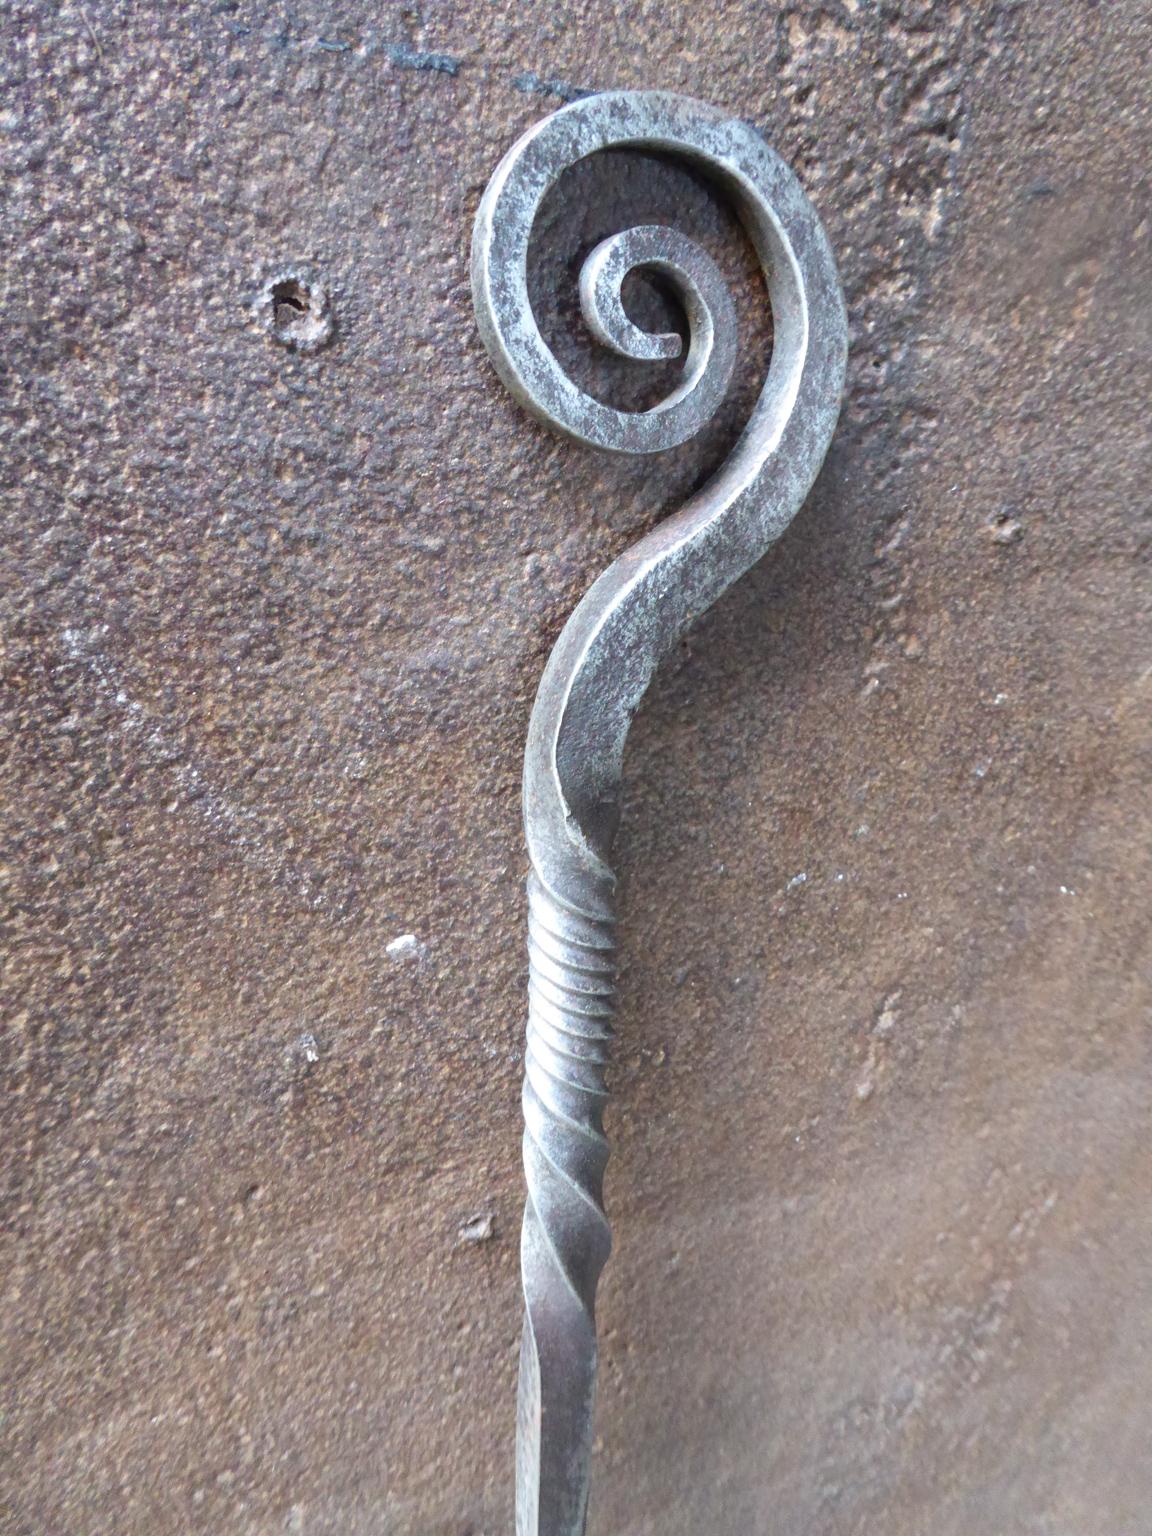 17th century French toasting fork made of polished steel. The forks were used to toast bread and meat in the fireplace.